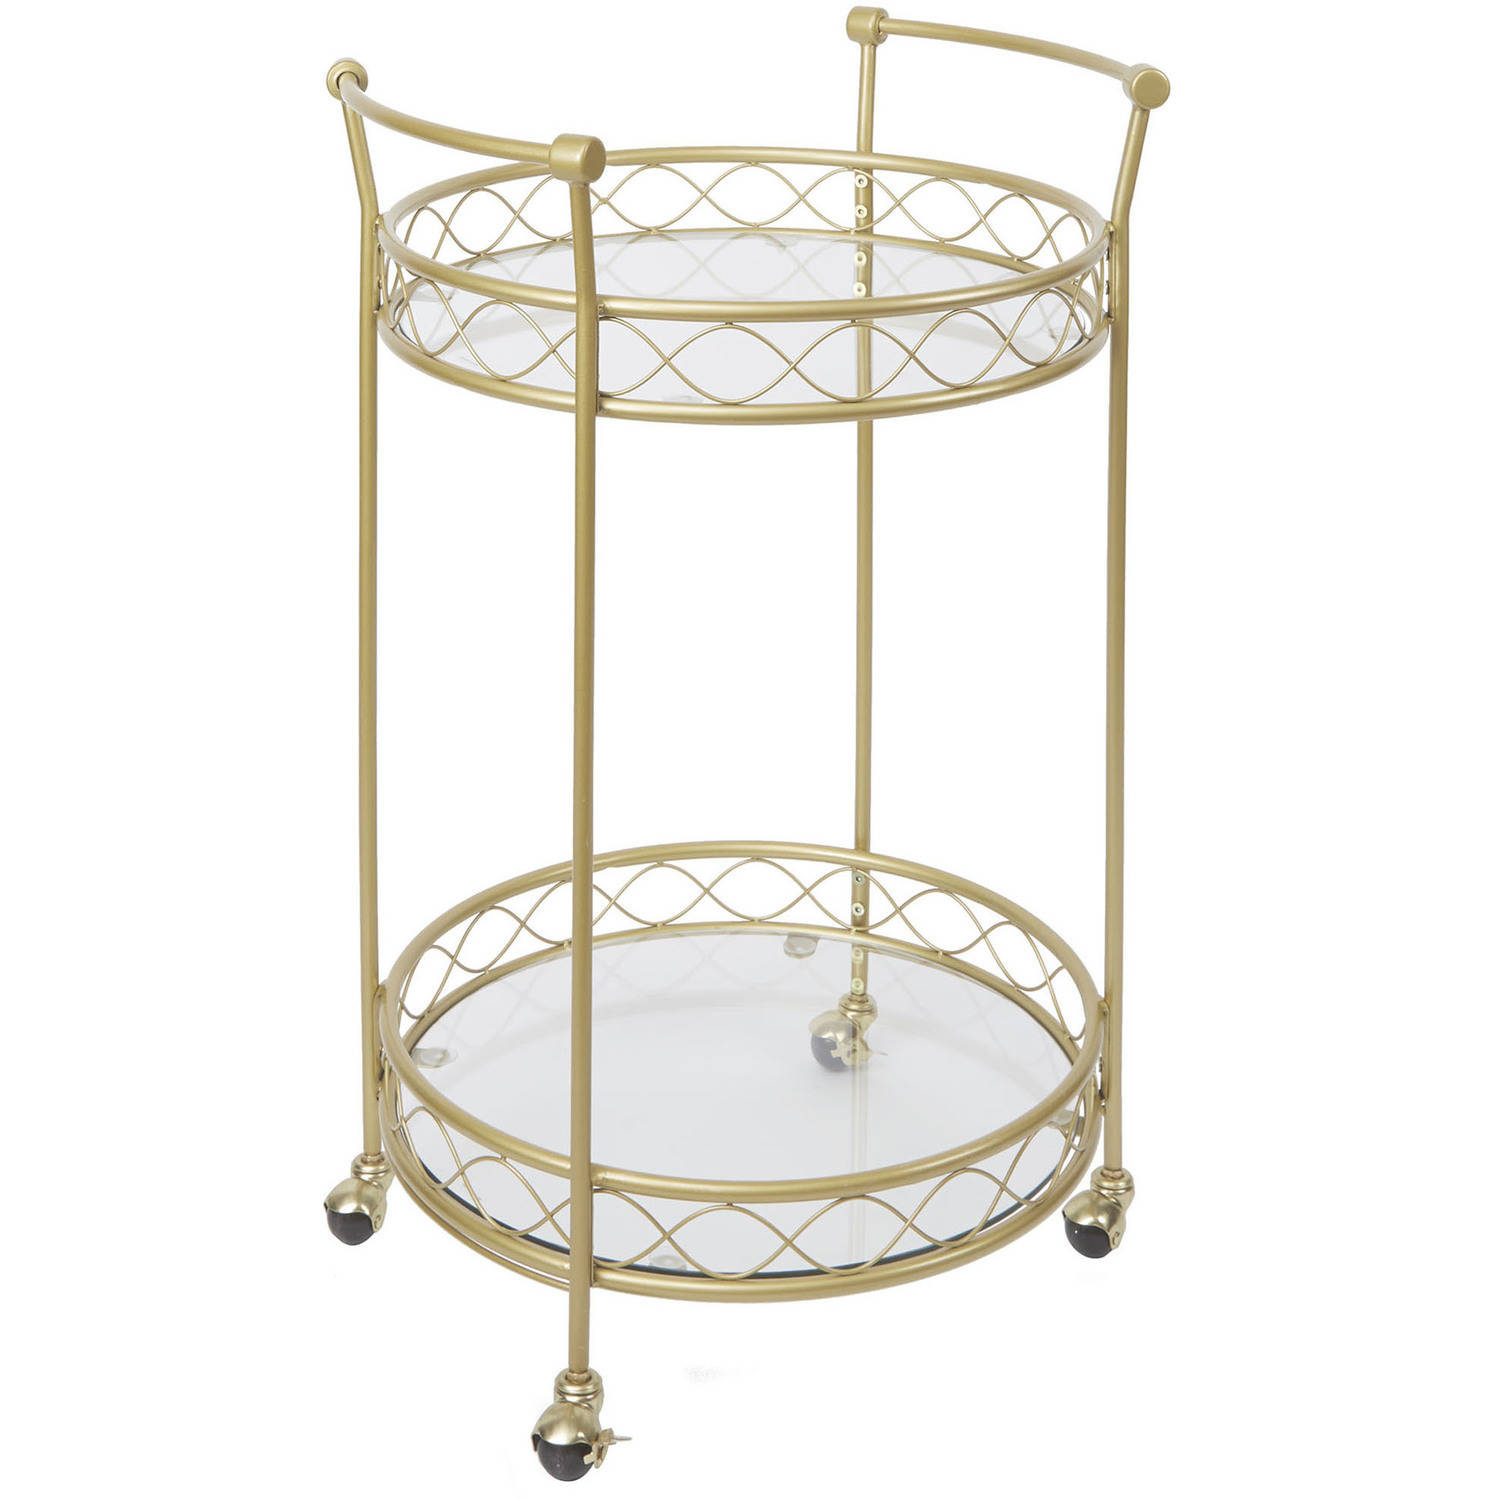 Better Homes & Gardens Mirabella Gold Metal Serving Barcart with Glass Shelves - image 2 of 3